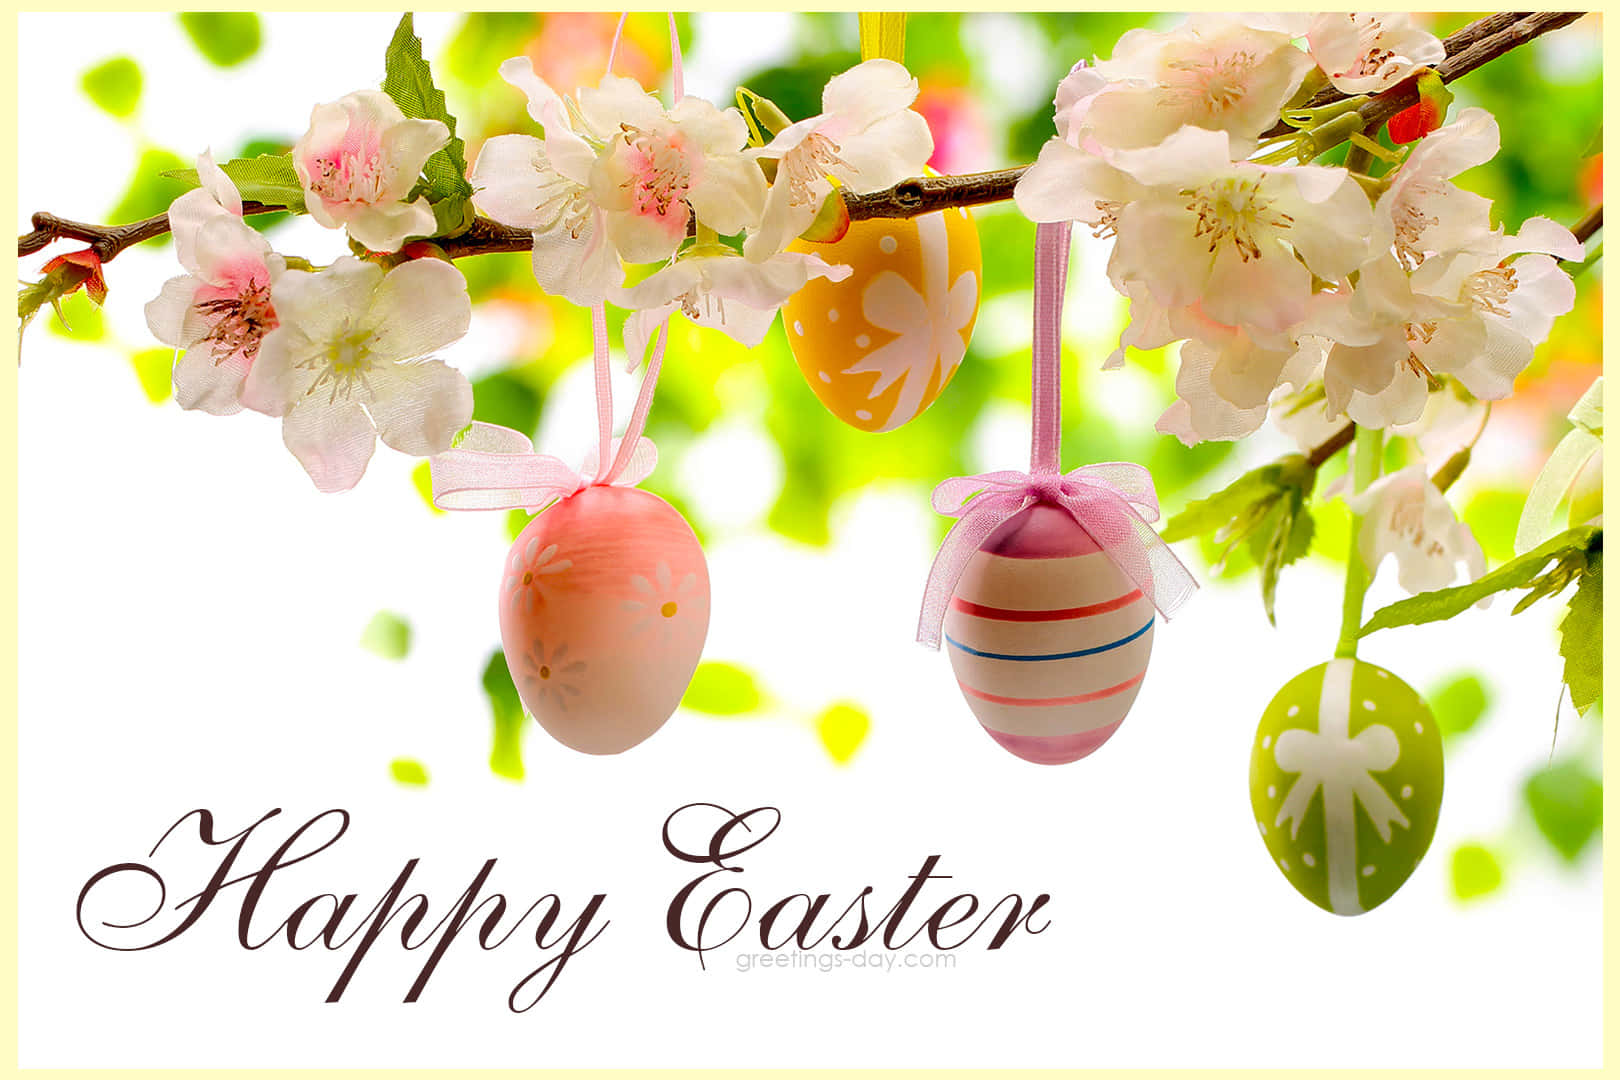 Celebrate Easter with family and friends!